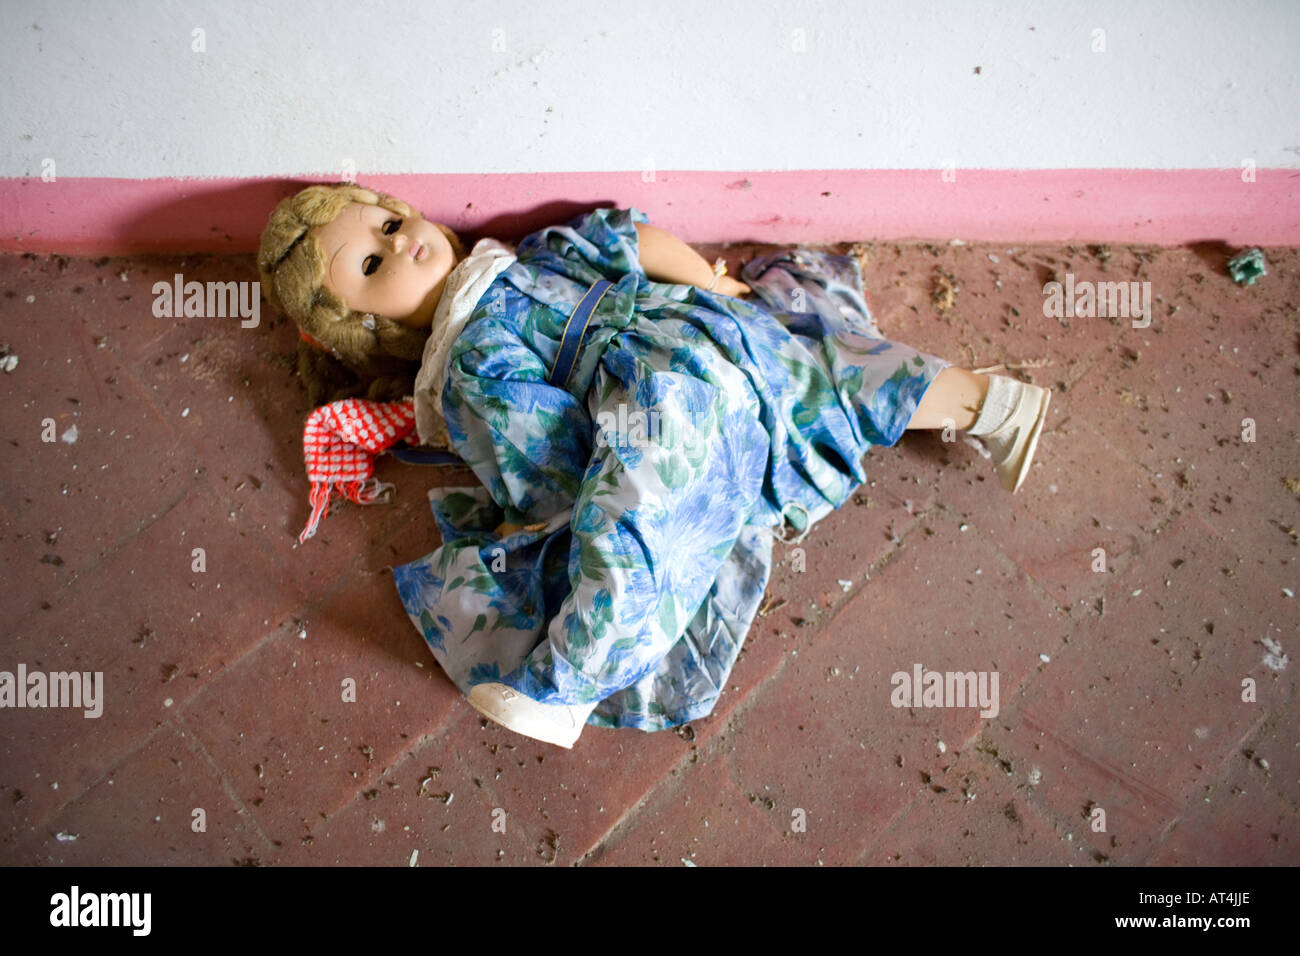 Childs doll abandoned in ruined house Stock Photo